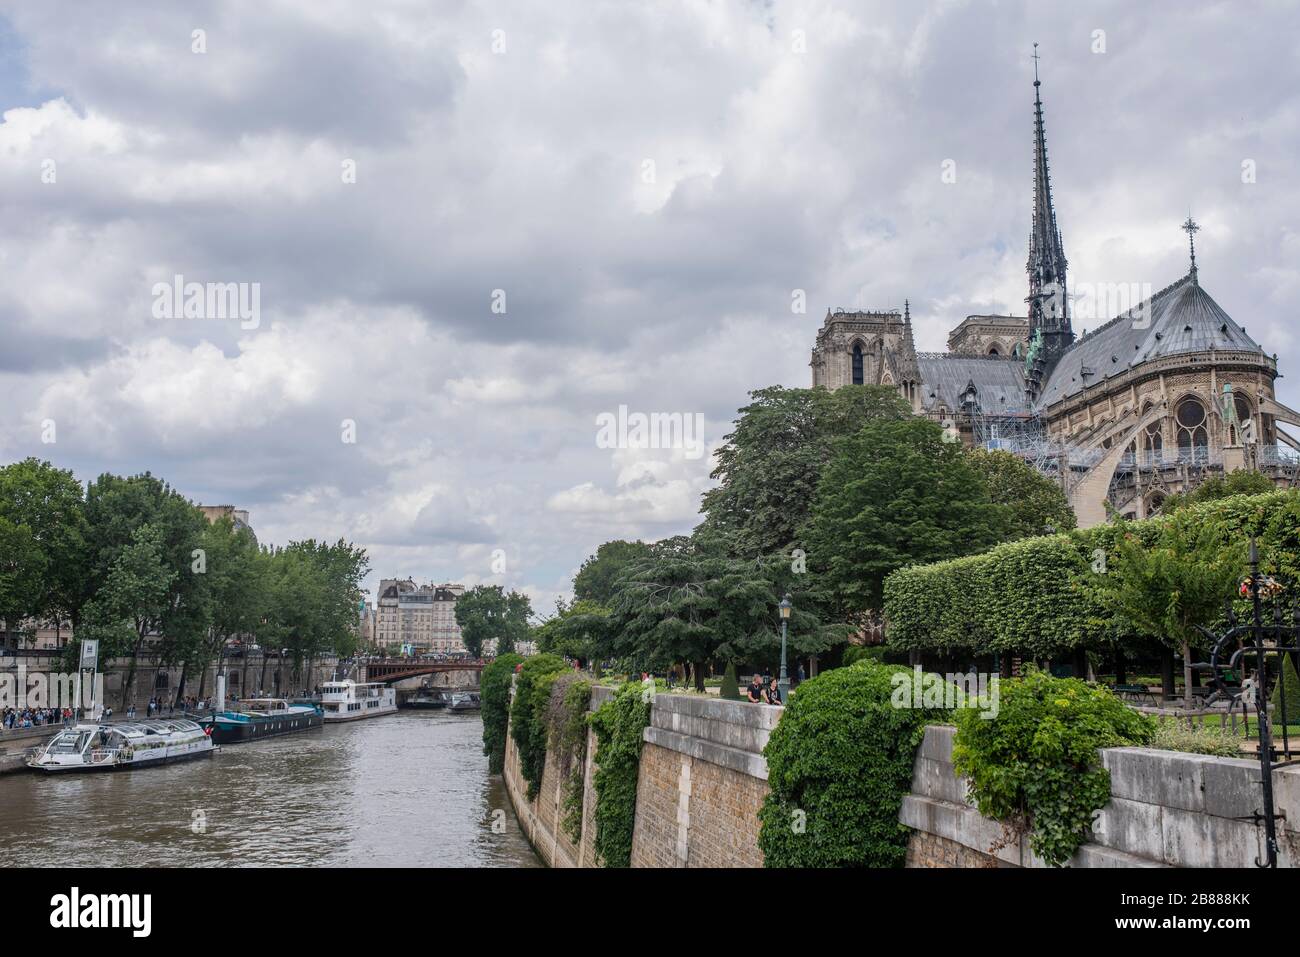 Notre Dame cathedral and Seine river in Paris, France. Dark heaven. Notre Dame view before fire. Travel locations in France, Europe Stock Photo